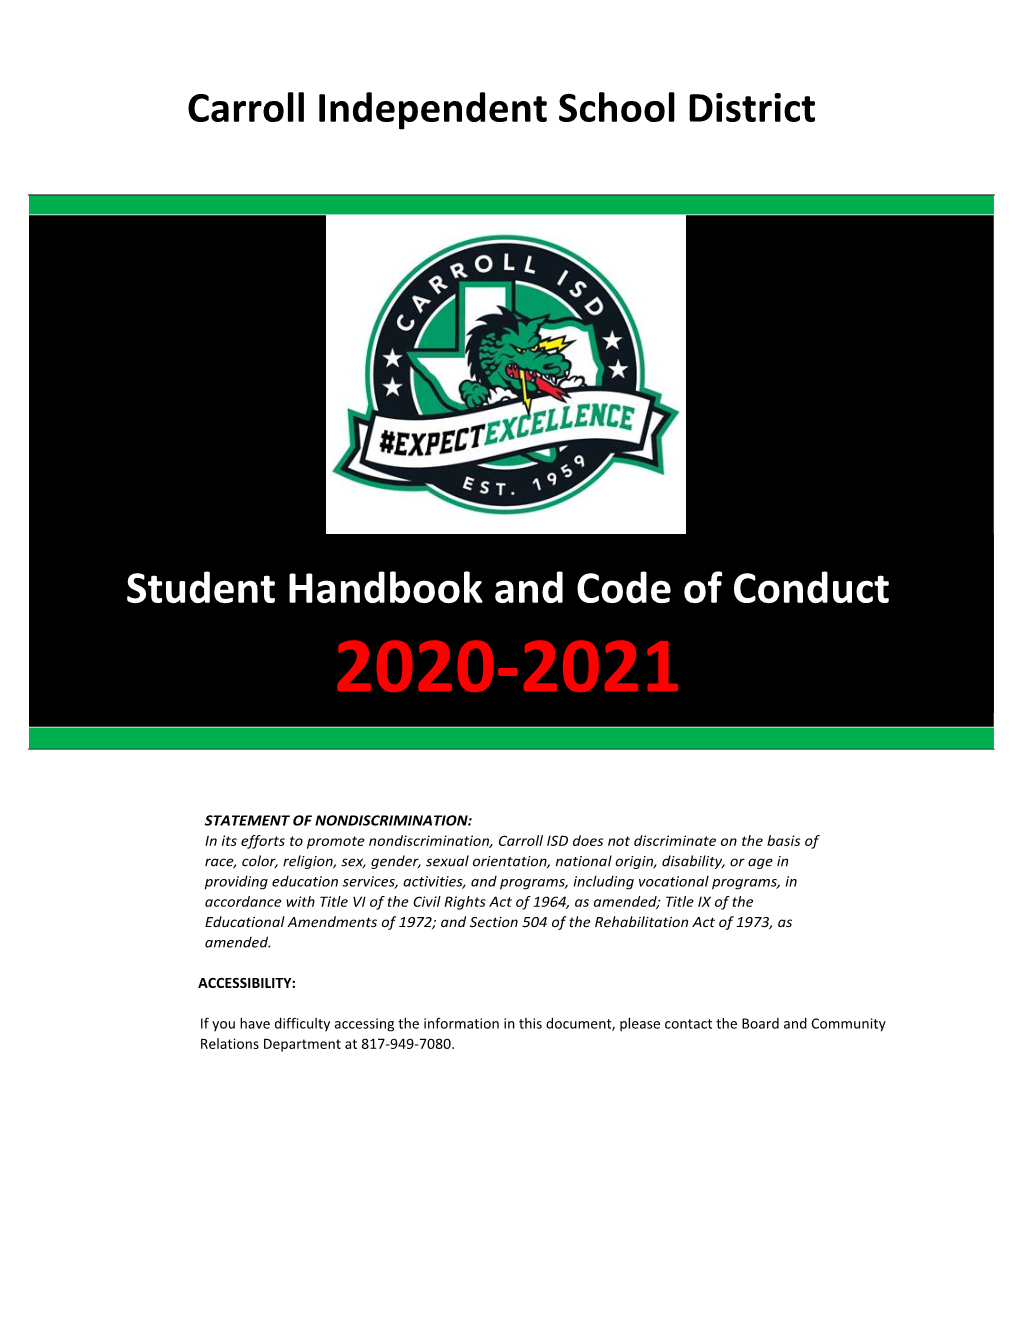 2020-2021 Student Handbook and Code of Conduct